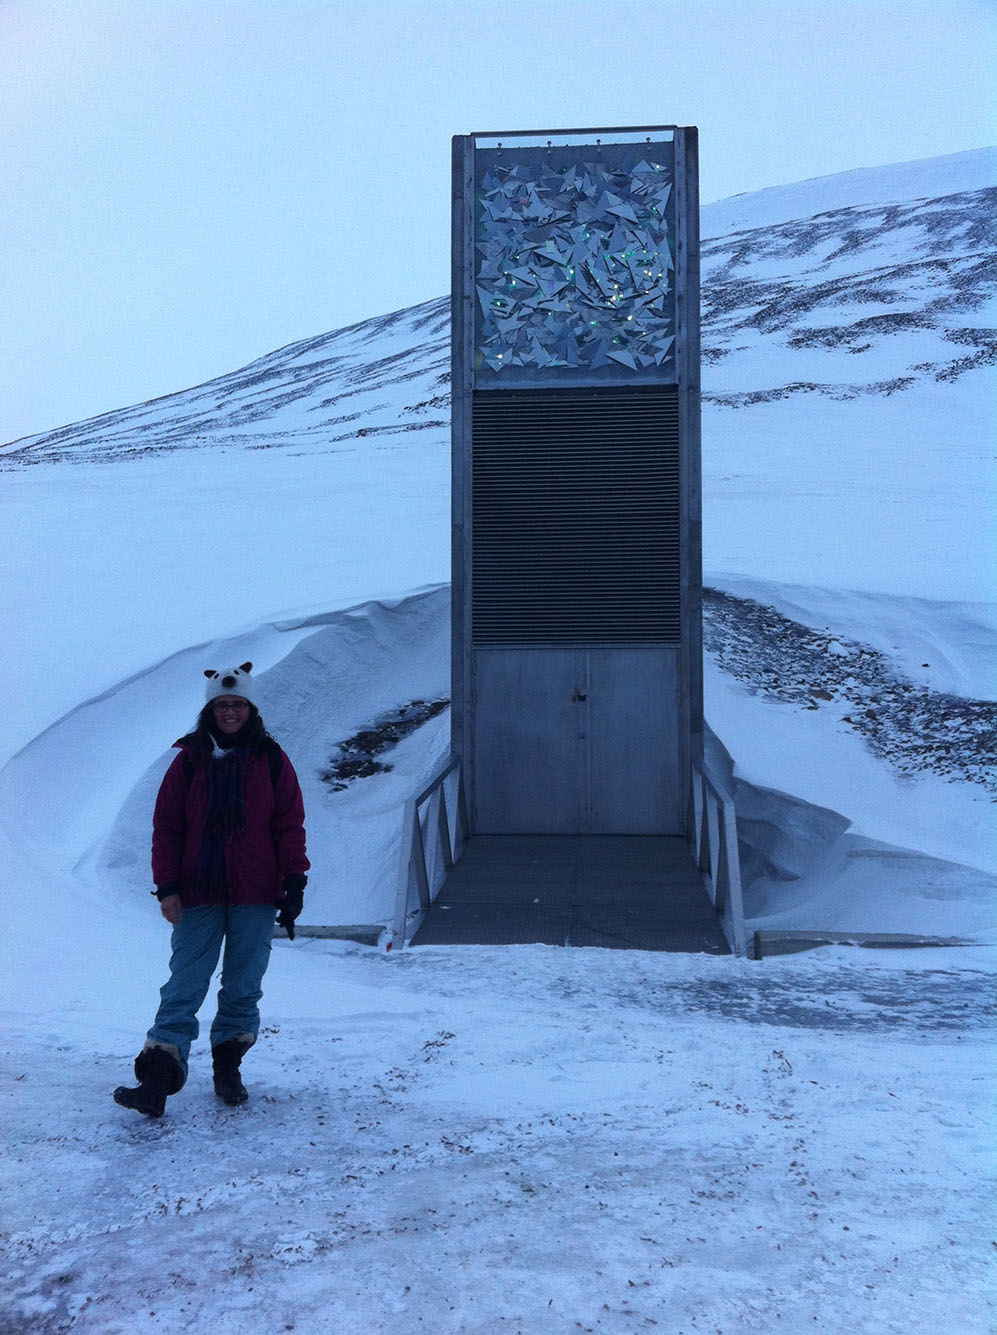 Photo: A white woman bundled up in Black winter coat, pants, hat, and boots stands in front of a large metal entrance in the middle of a snowy mountain.